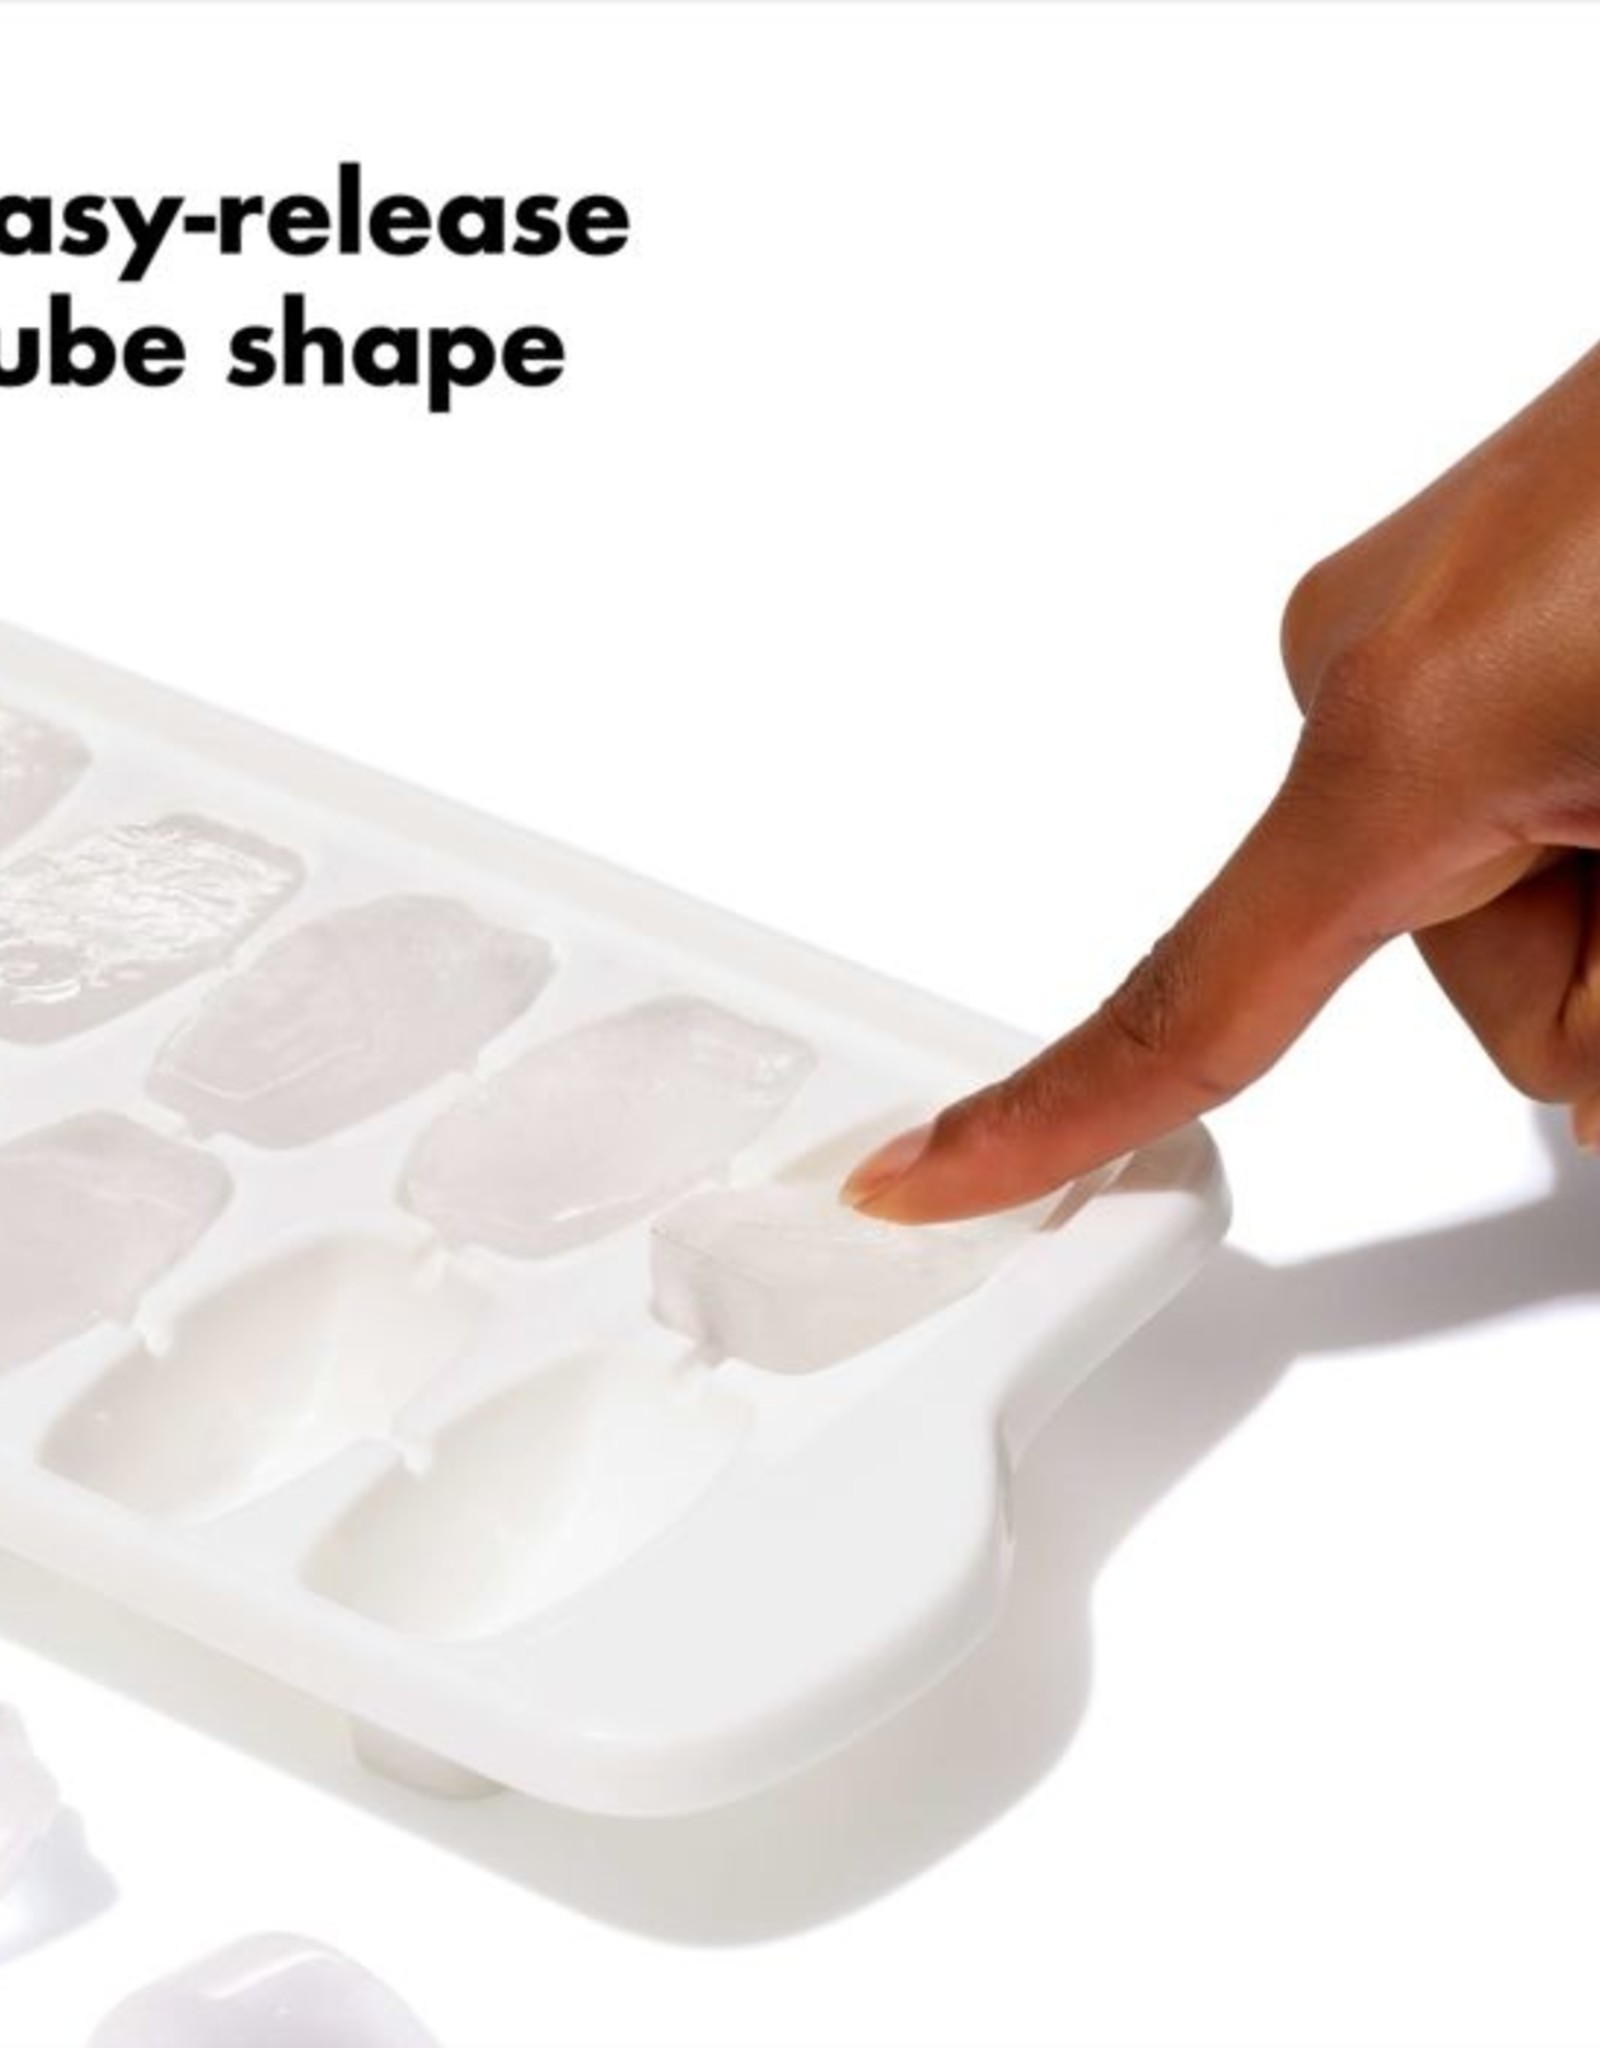 Oxo Ice Cube Tray with Cover